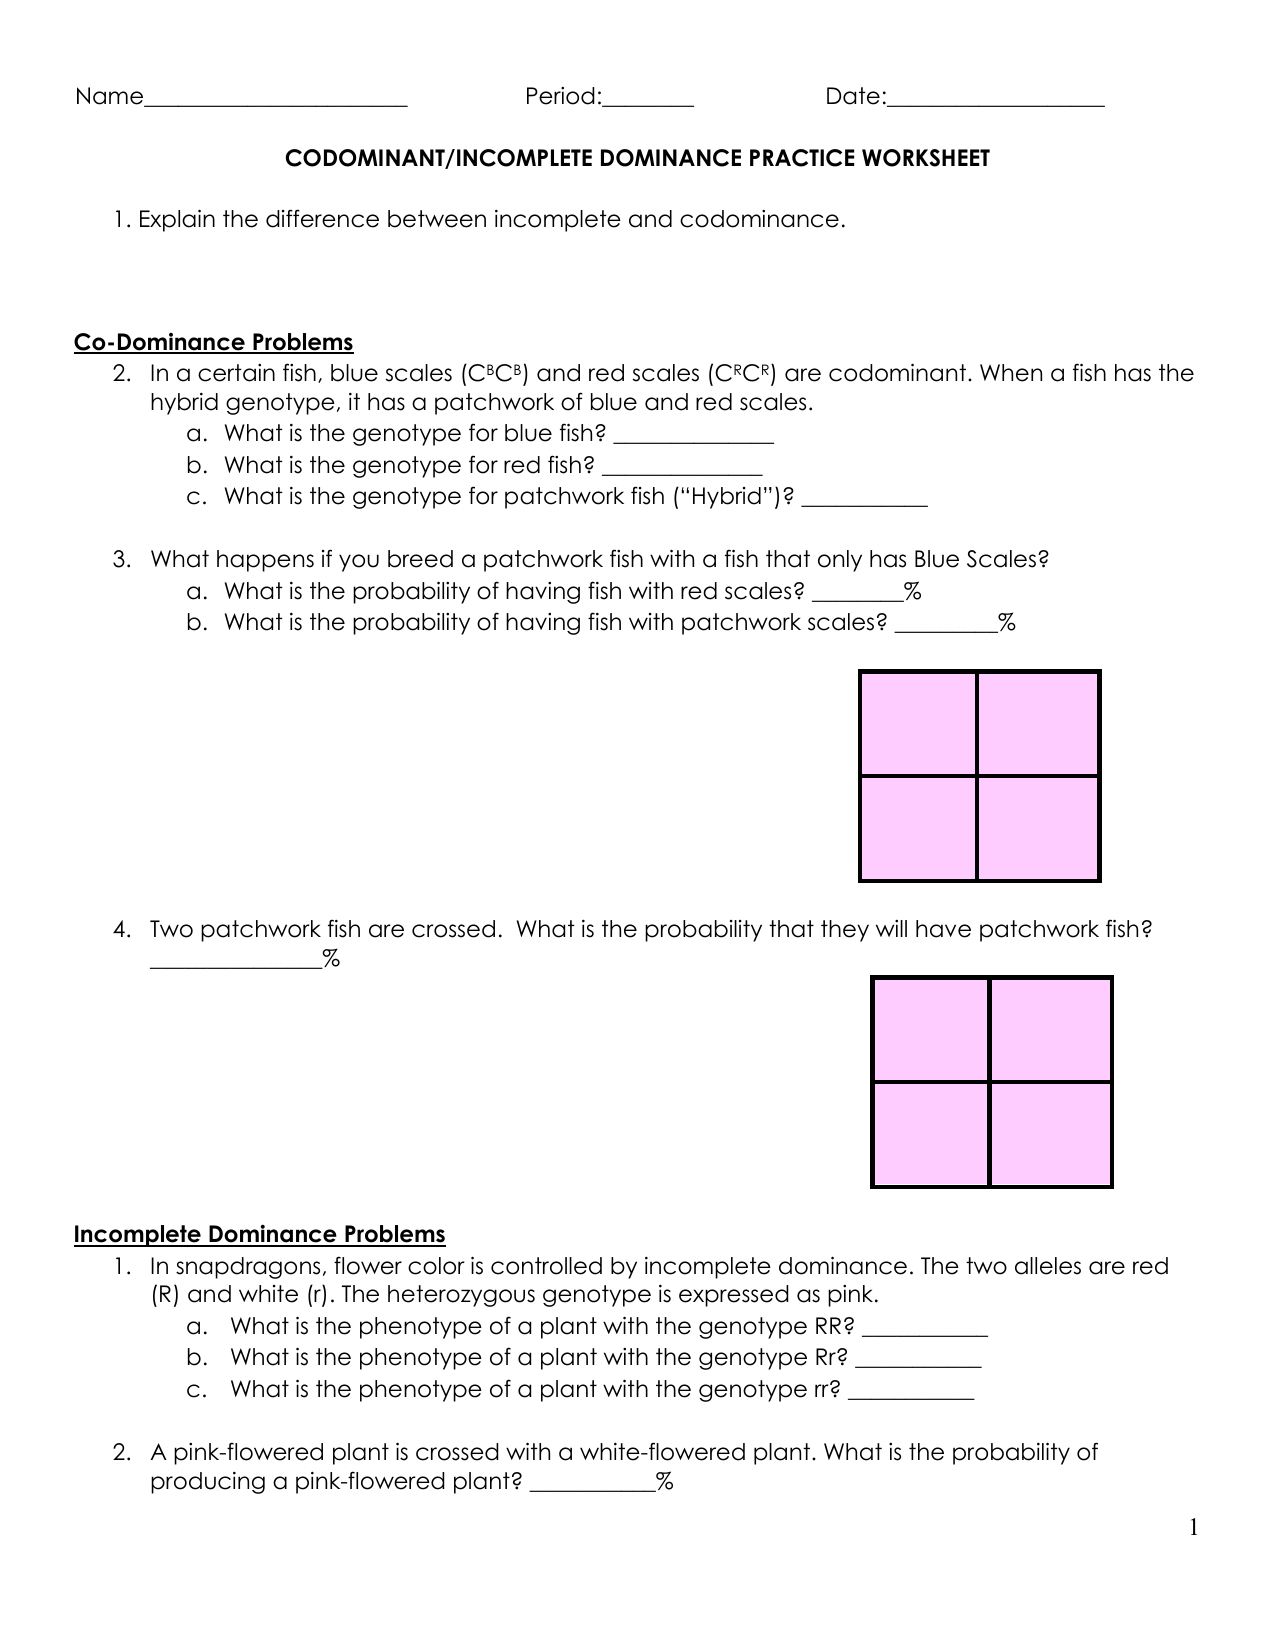 Patchwork Fish Codominant Incomplete Dominance Practice Worksheet Answer Key Judithcahen 